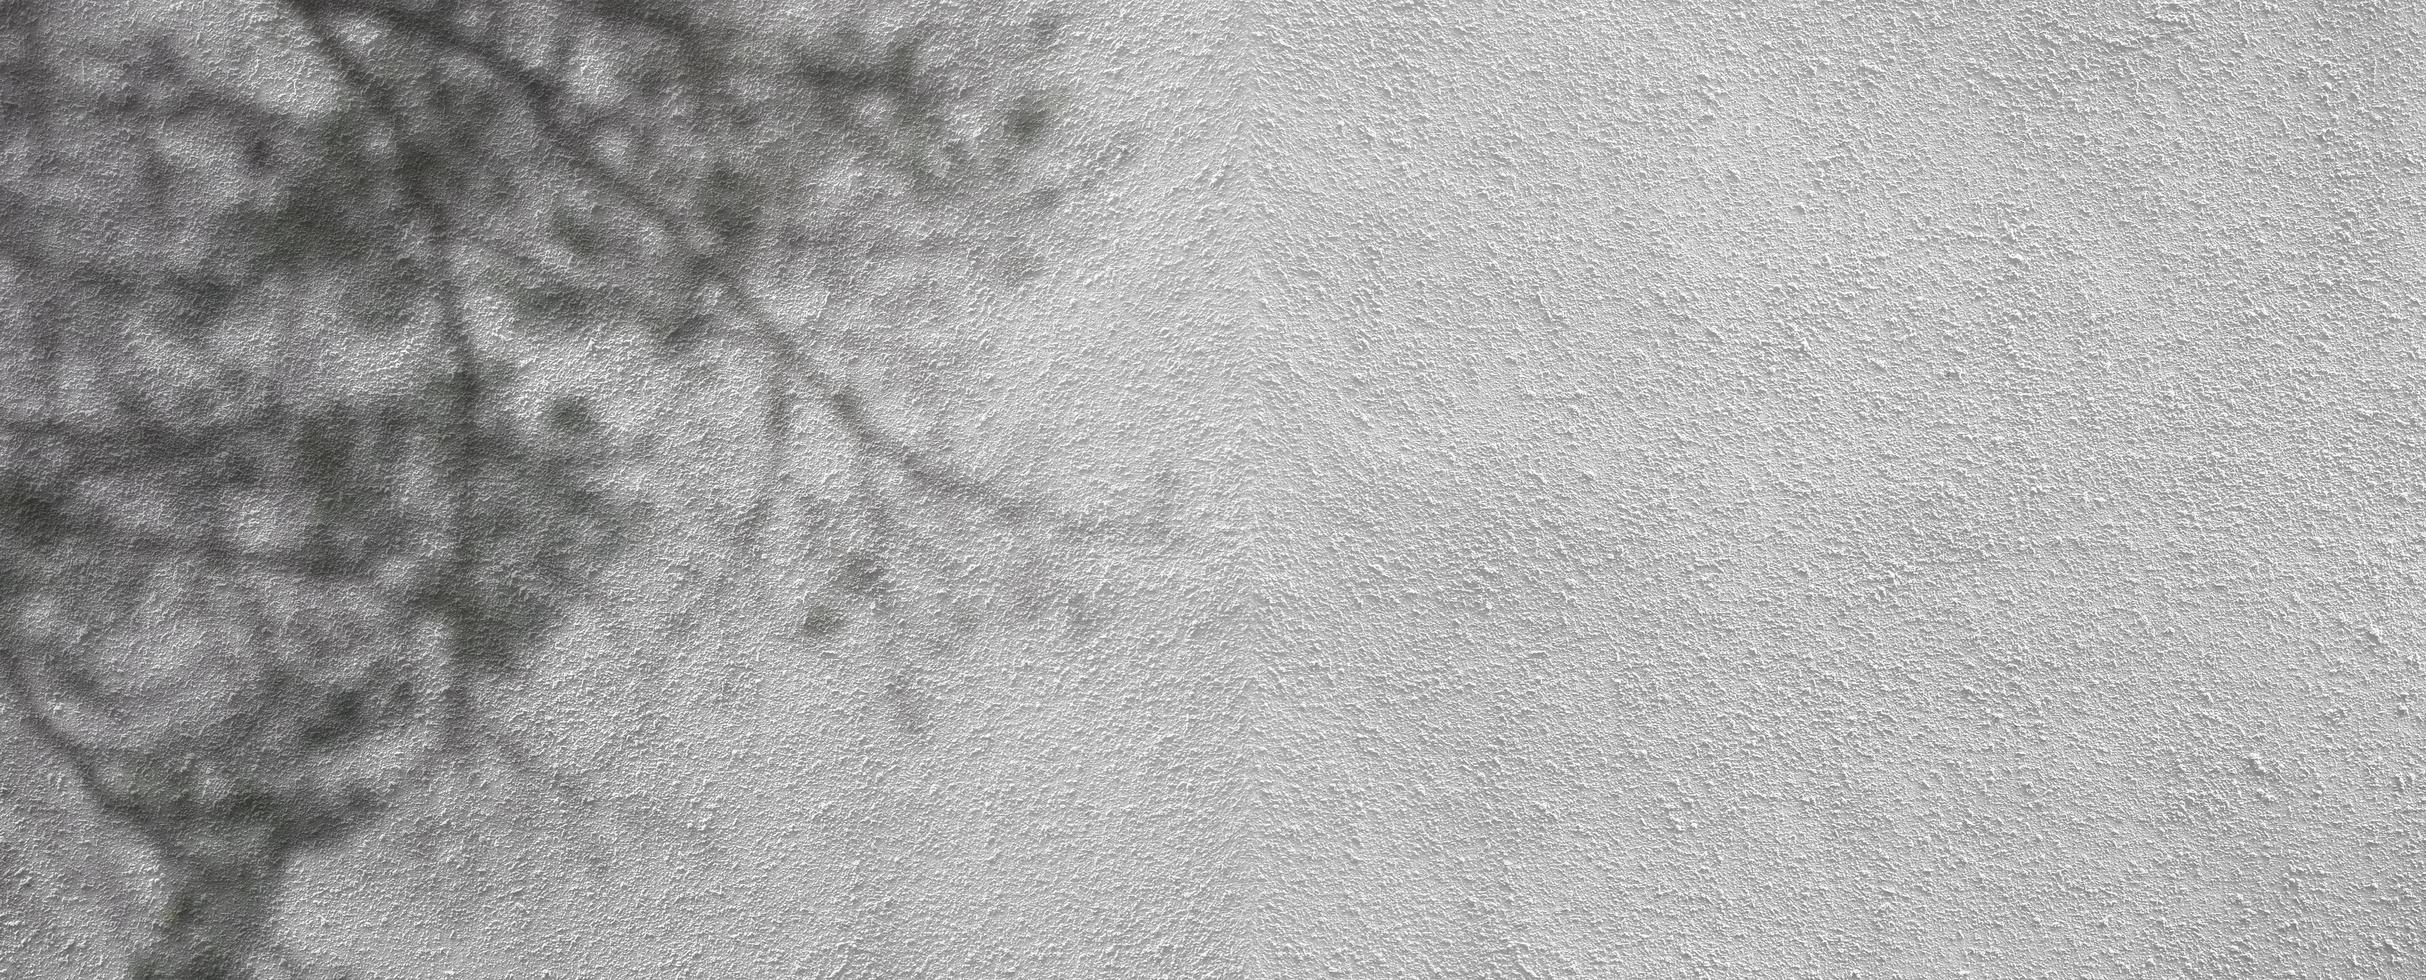 White cement wall texture background with tree shadow Rough texture photo